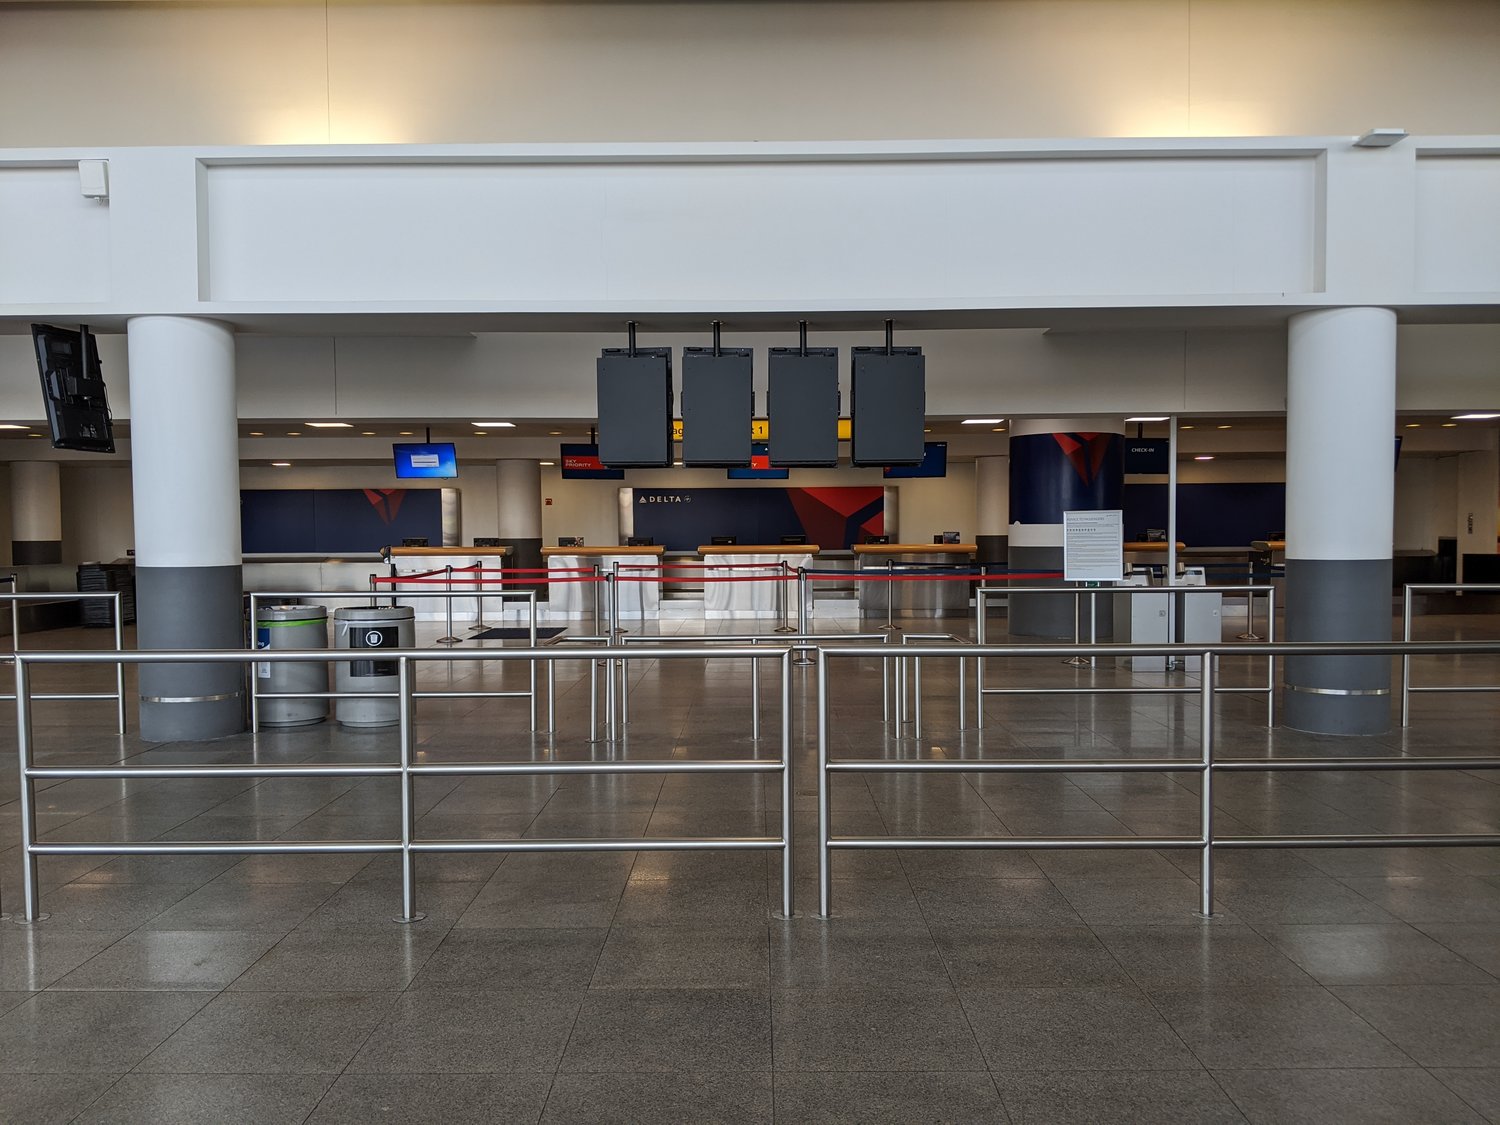 JFK Terminal 4 was practically deserted in late April.